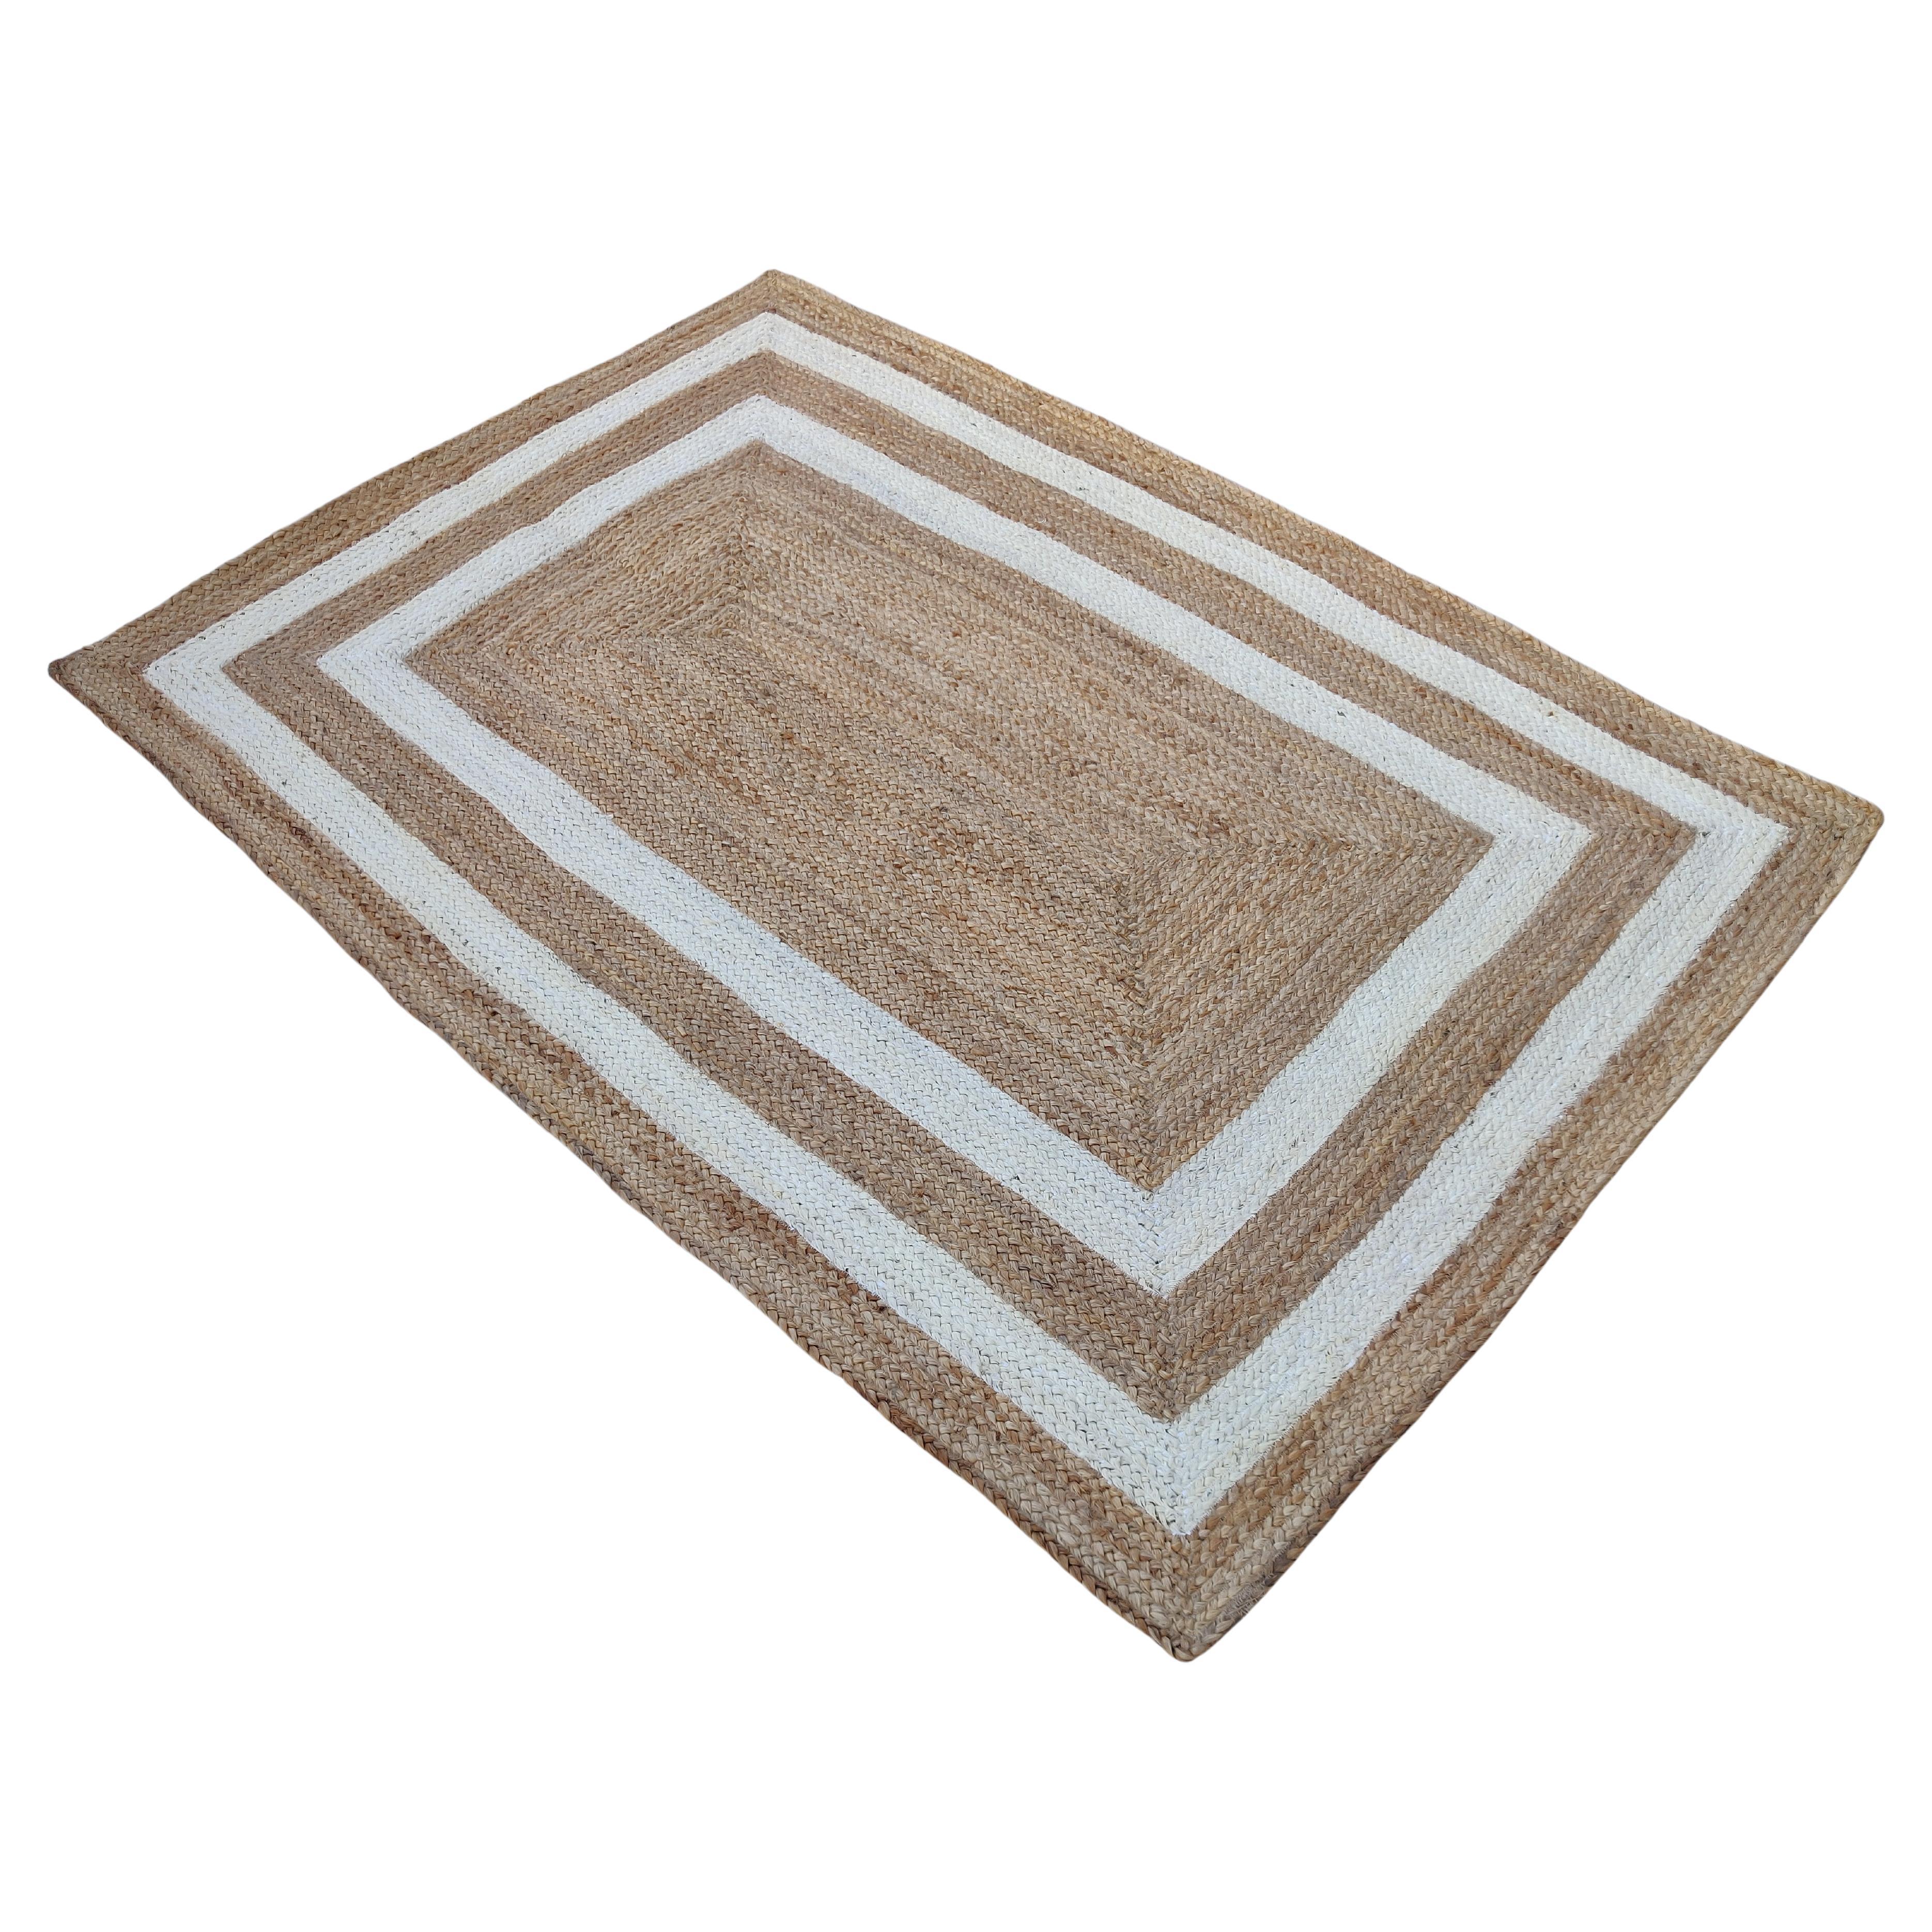 Handmade Jute Area Flat Weave Rug, 4x6 Jute And White Bordered Indian Dhurrie For Sale